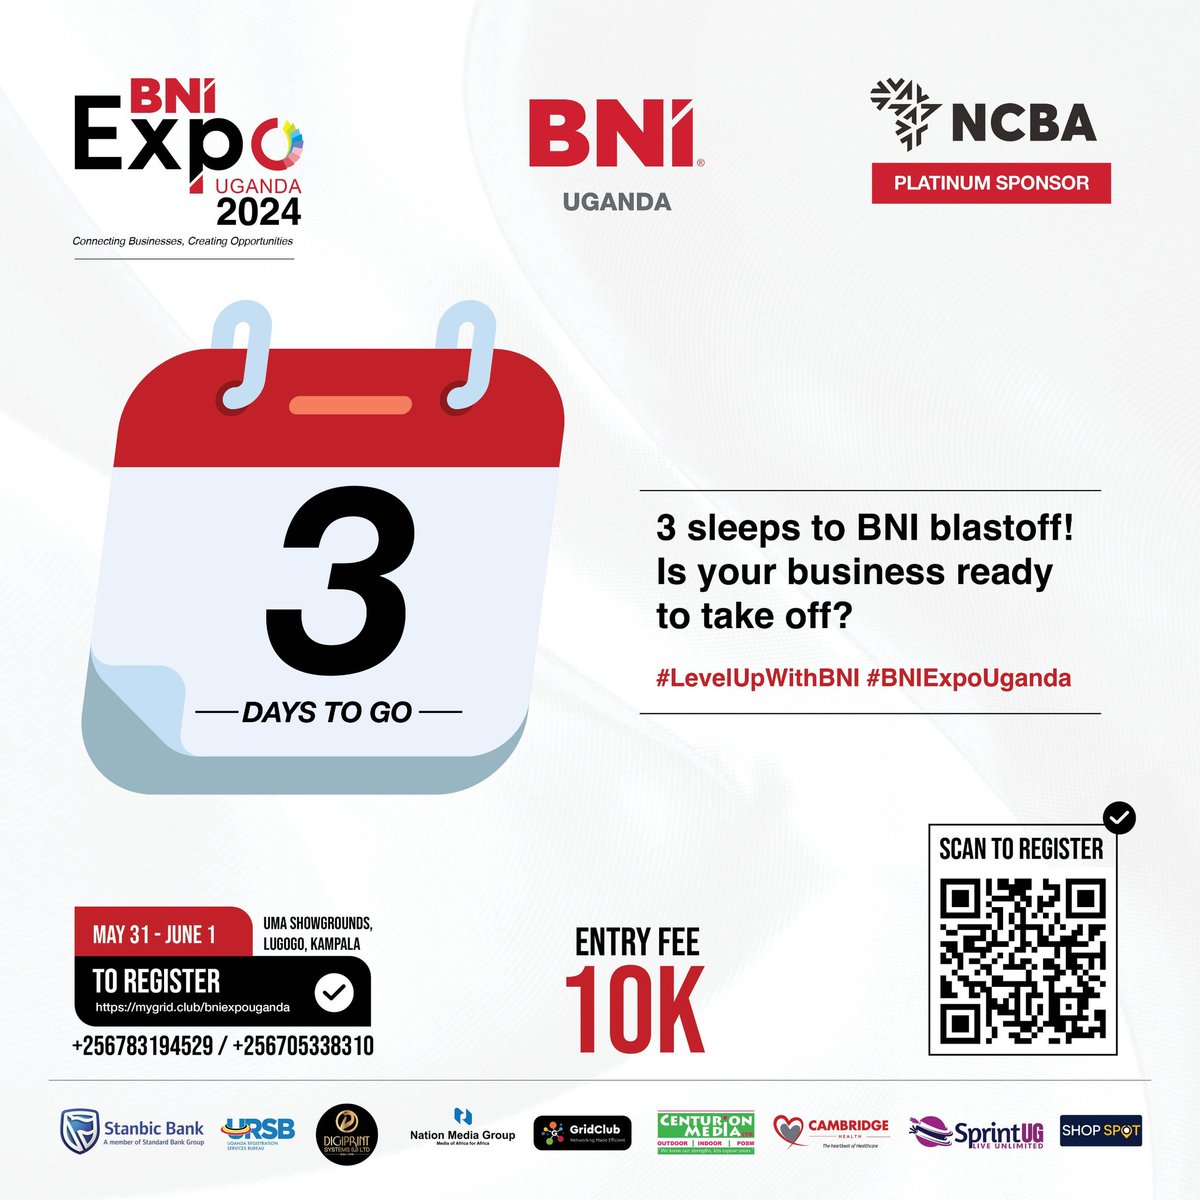 Tue, Wed, Thur...𝖥𝖱𝖨𝖣𝖠𝖸 🤗 Only 3 Days left to the #BNIExpo2024, the first of a kind business event for people and businesses to connect, learn and discover untapped opportunities. 📅: Friday & Saturday 🎟️: 10k Per Day 📍: UMA Hall, Lugogo.